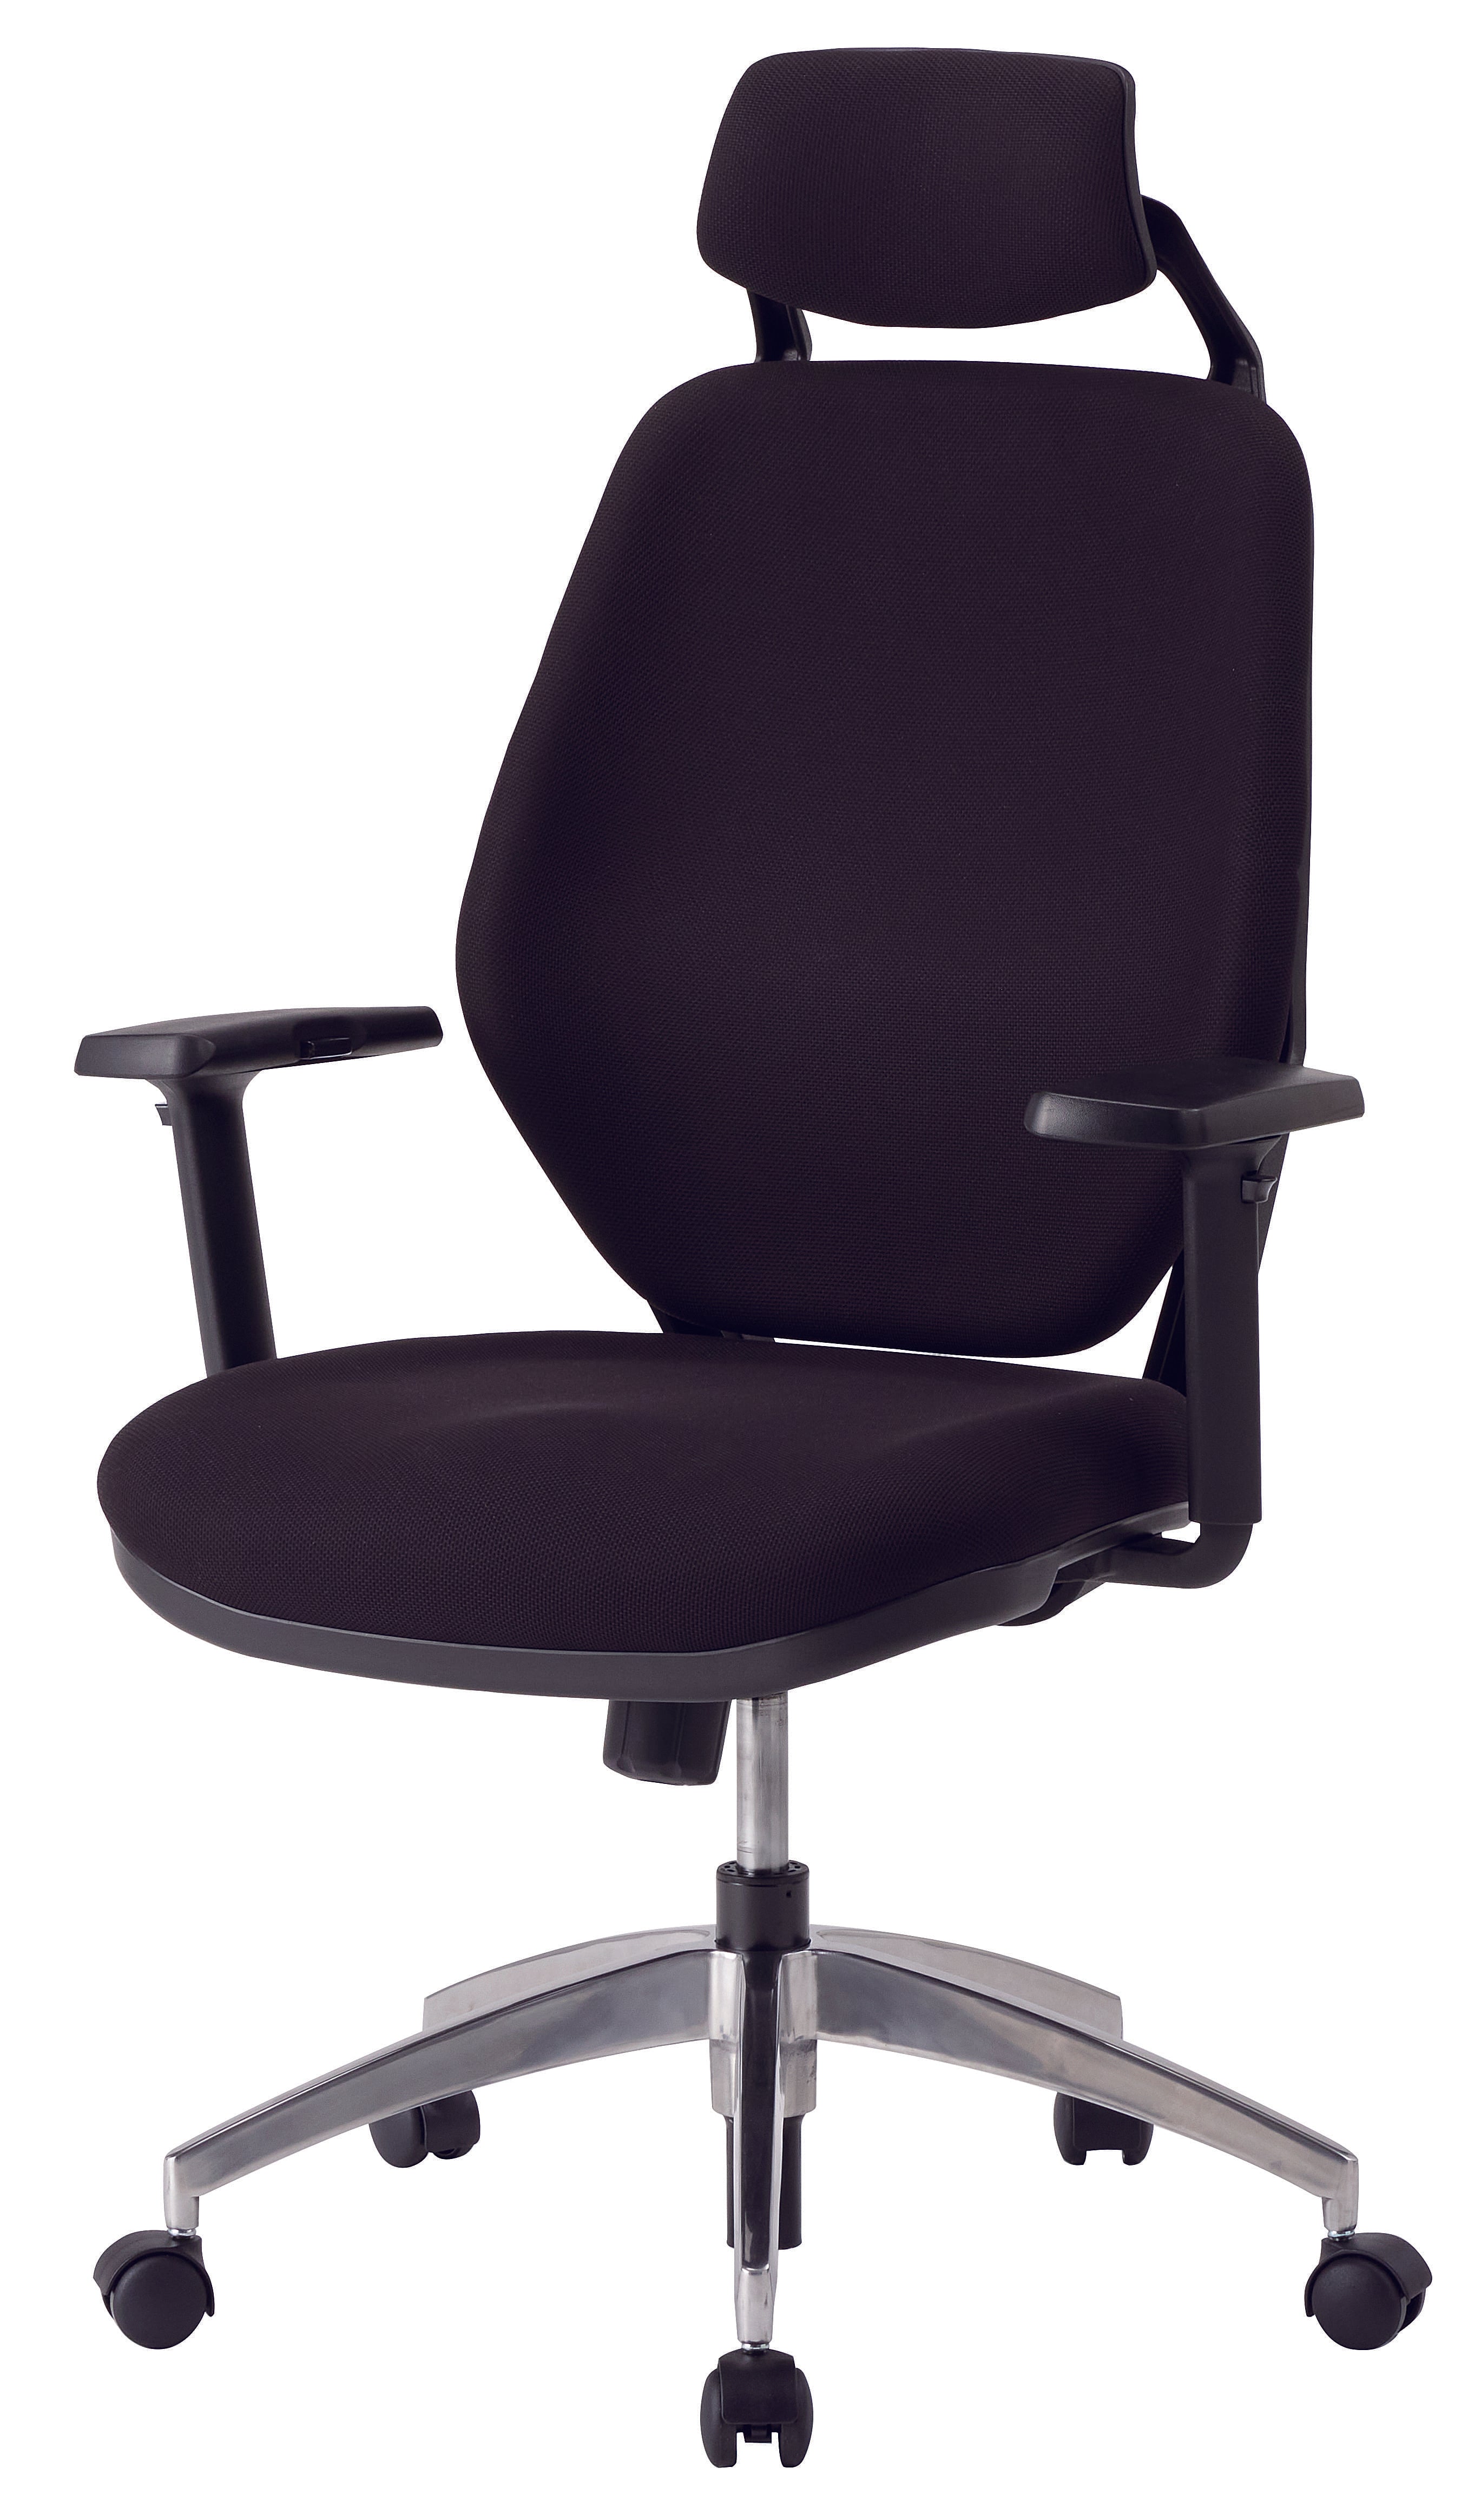 LUX Office Chair　SPECIAL EDITION